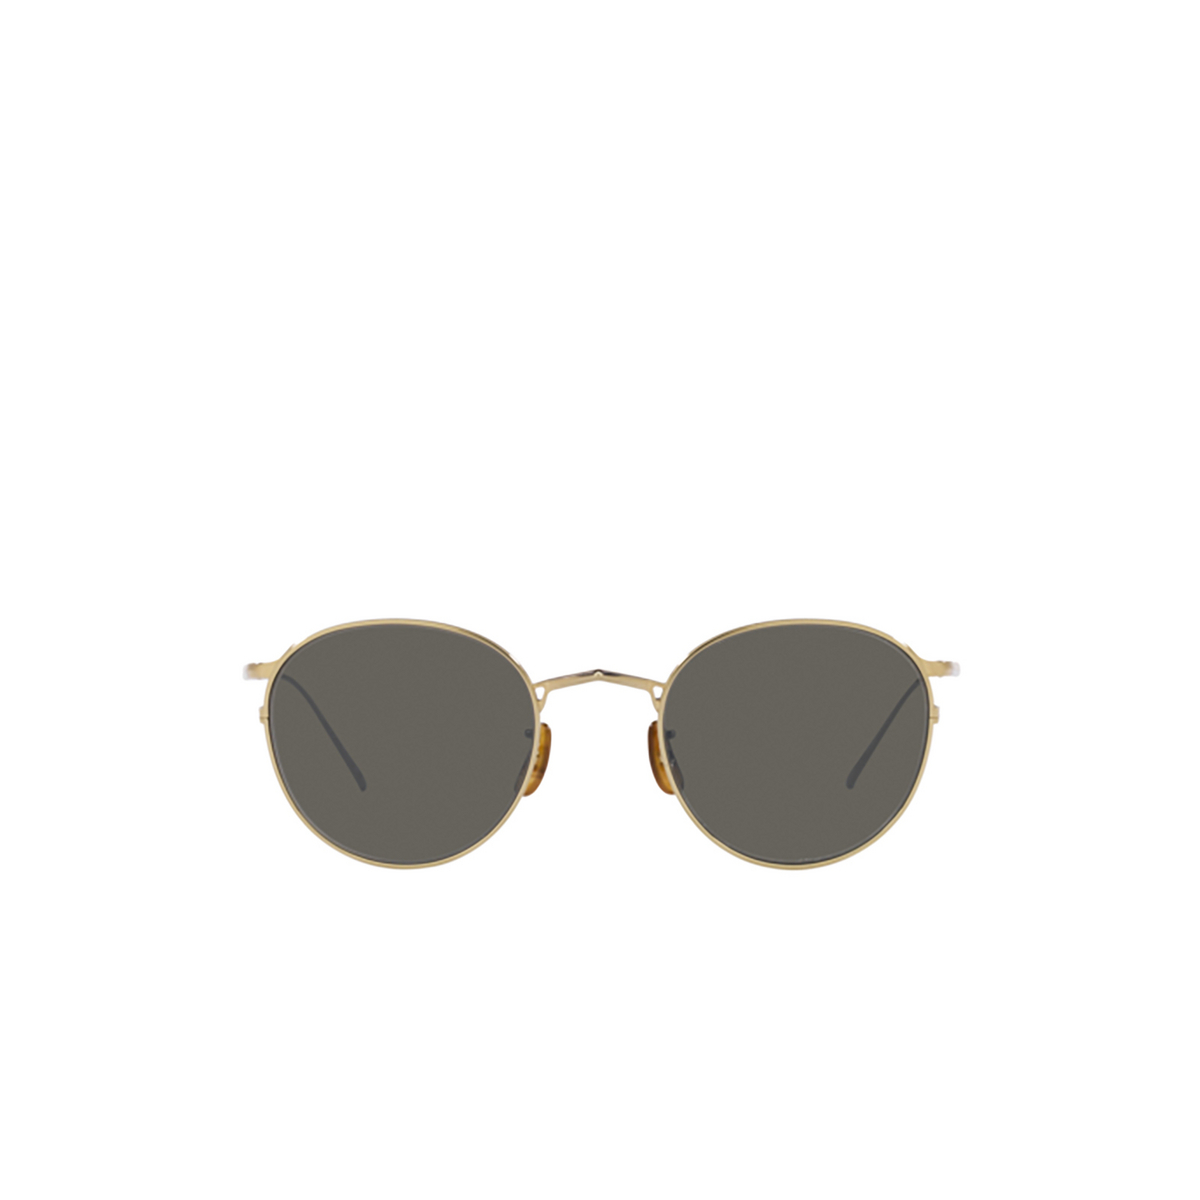 Oliver Peoples G. PONTI-4 Sunglasses 5035V9 Soft Gold - front view